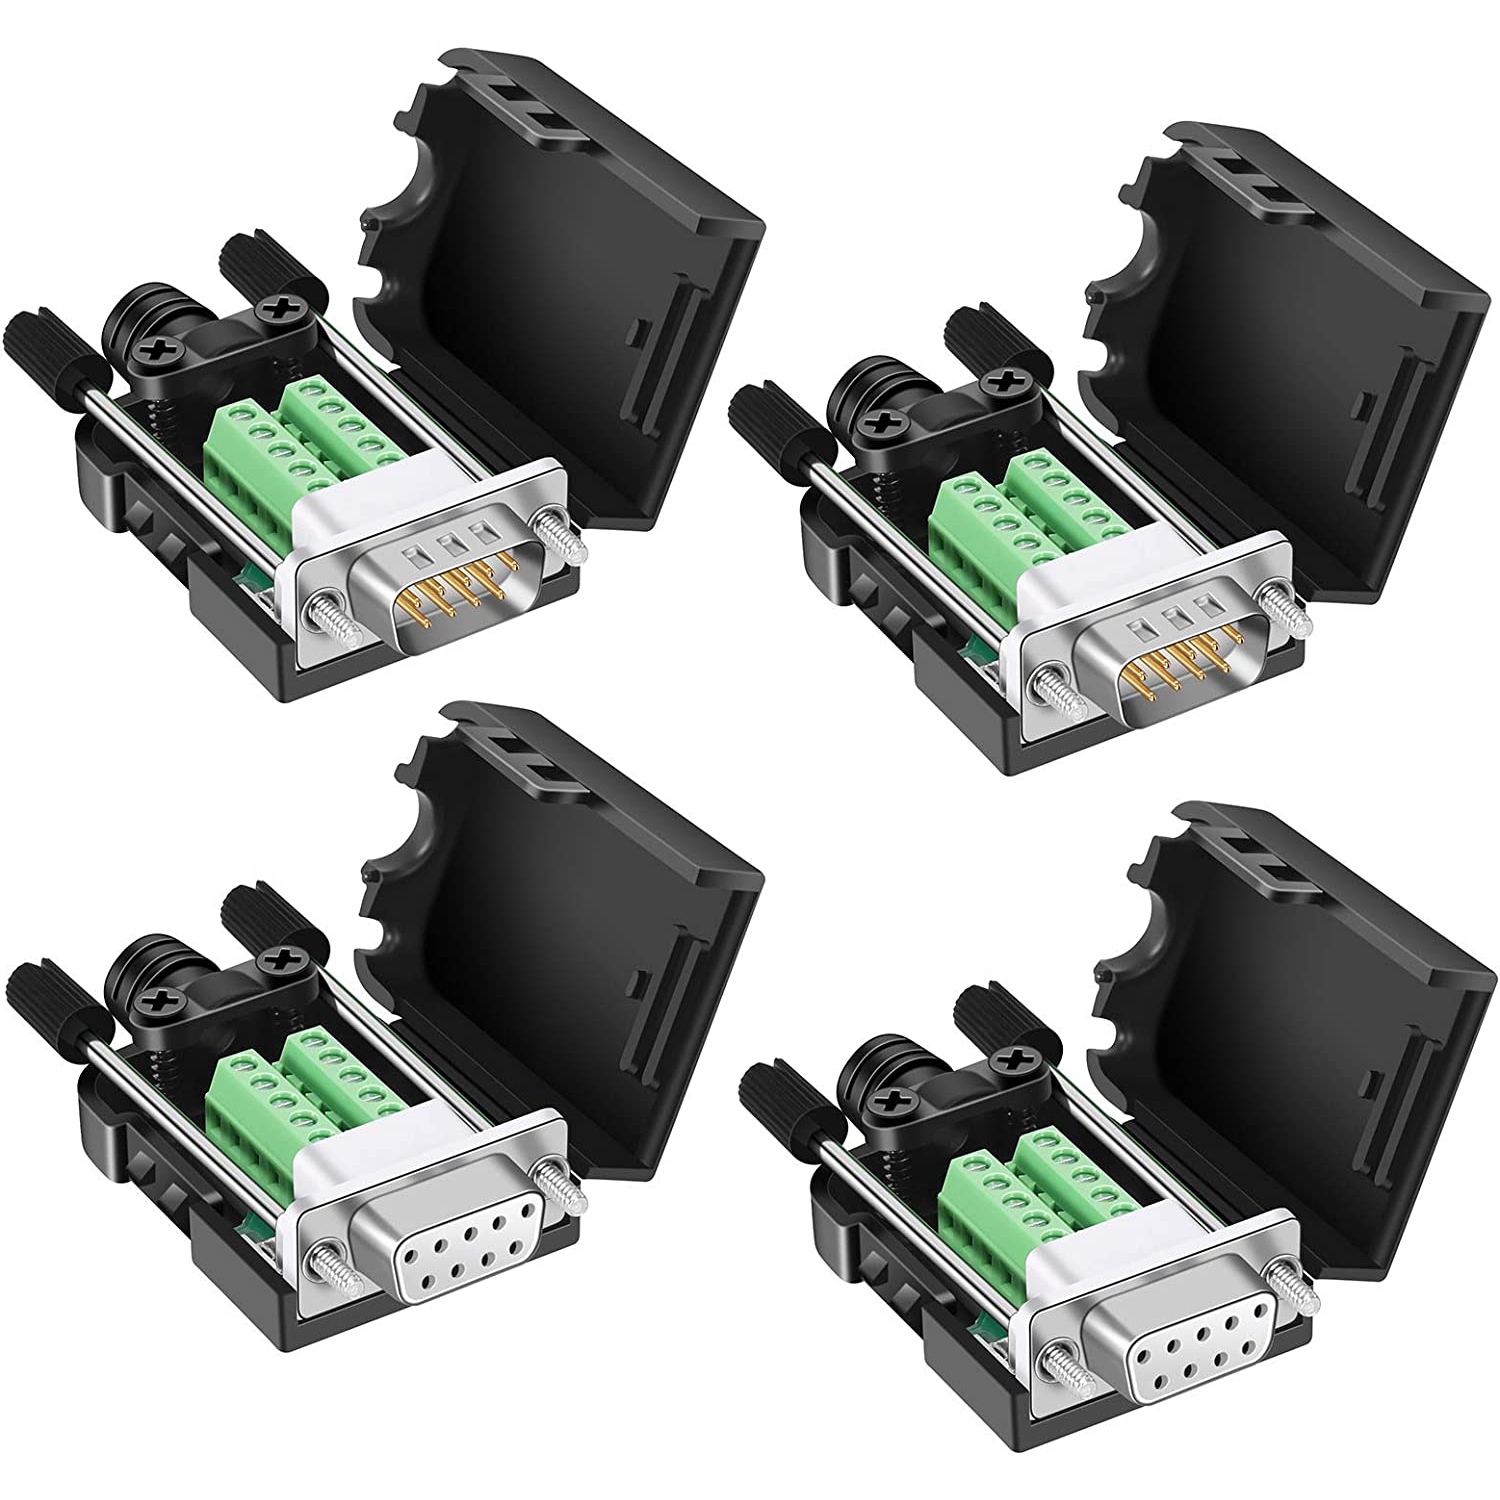 D DB9 Solderless Connector (2Male+2Female), DB9 Breakout Connector RS232 D-SUB Serial to 9pin Port Terminal with Case